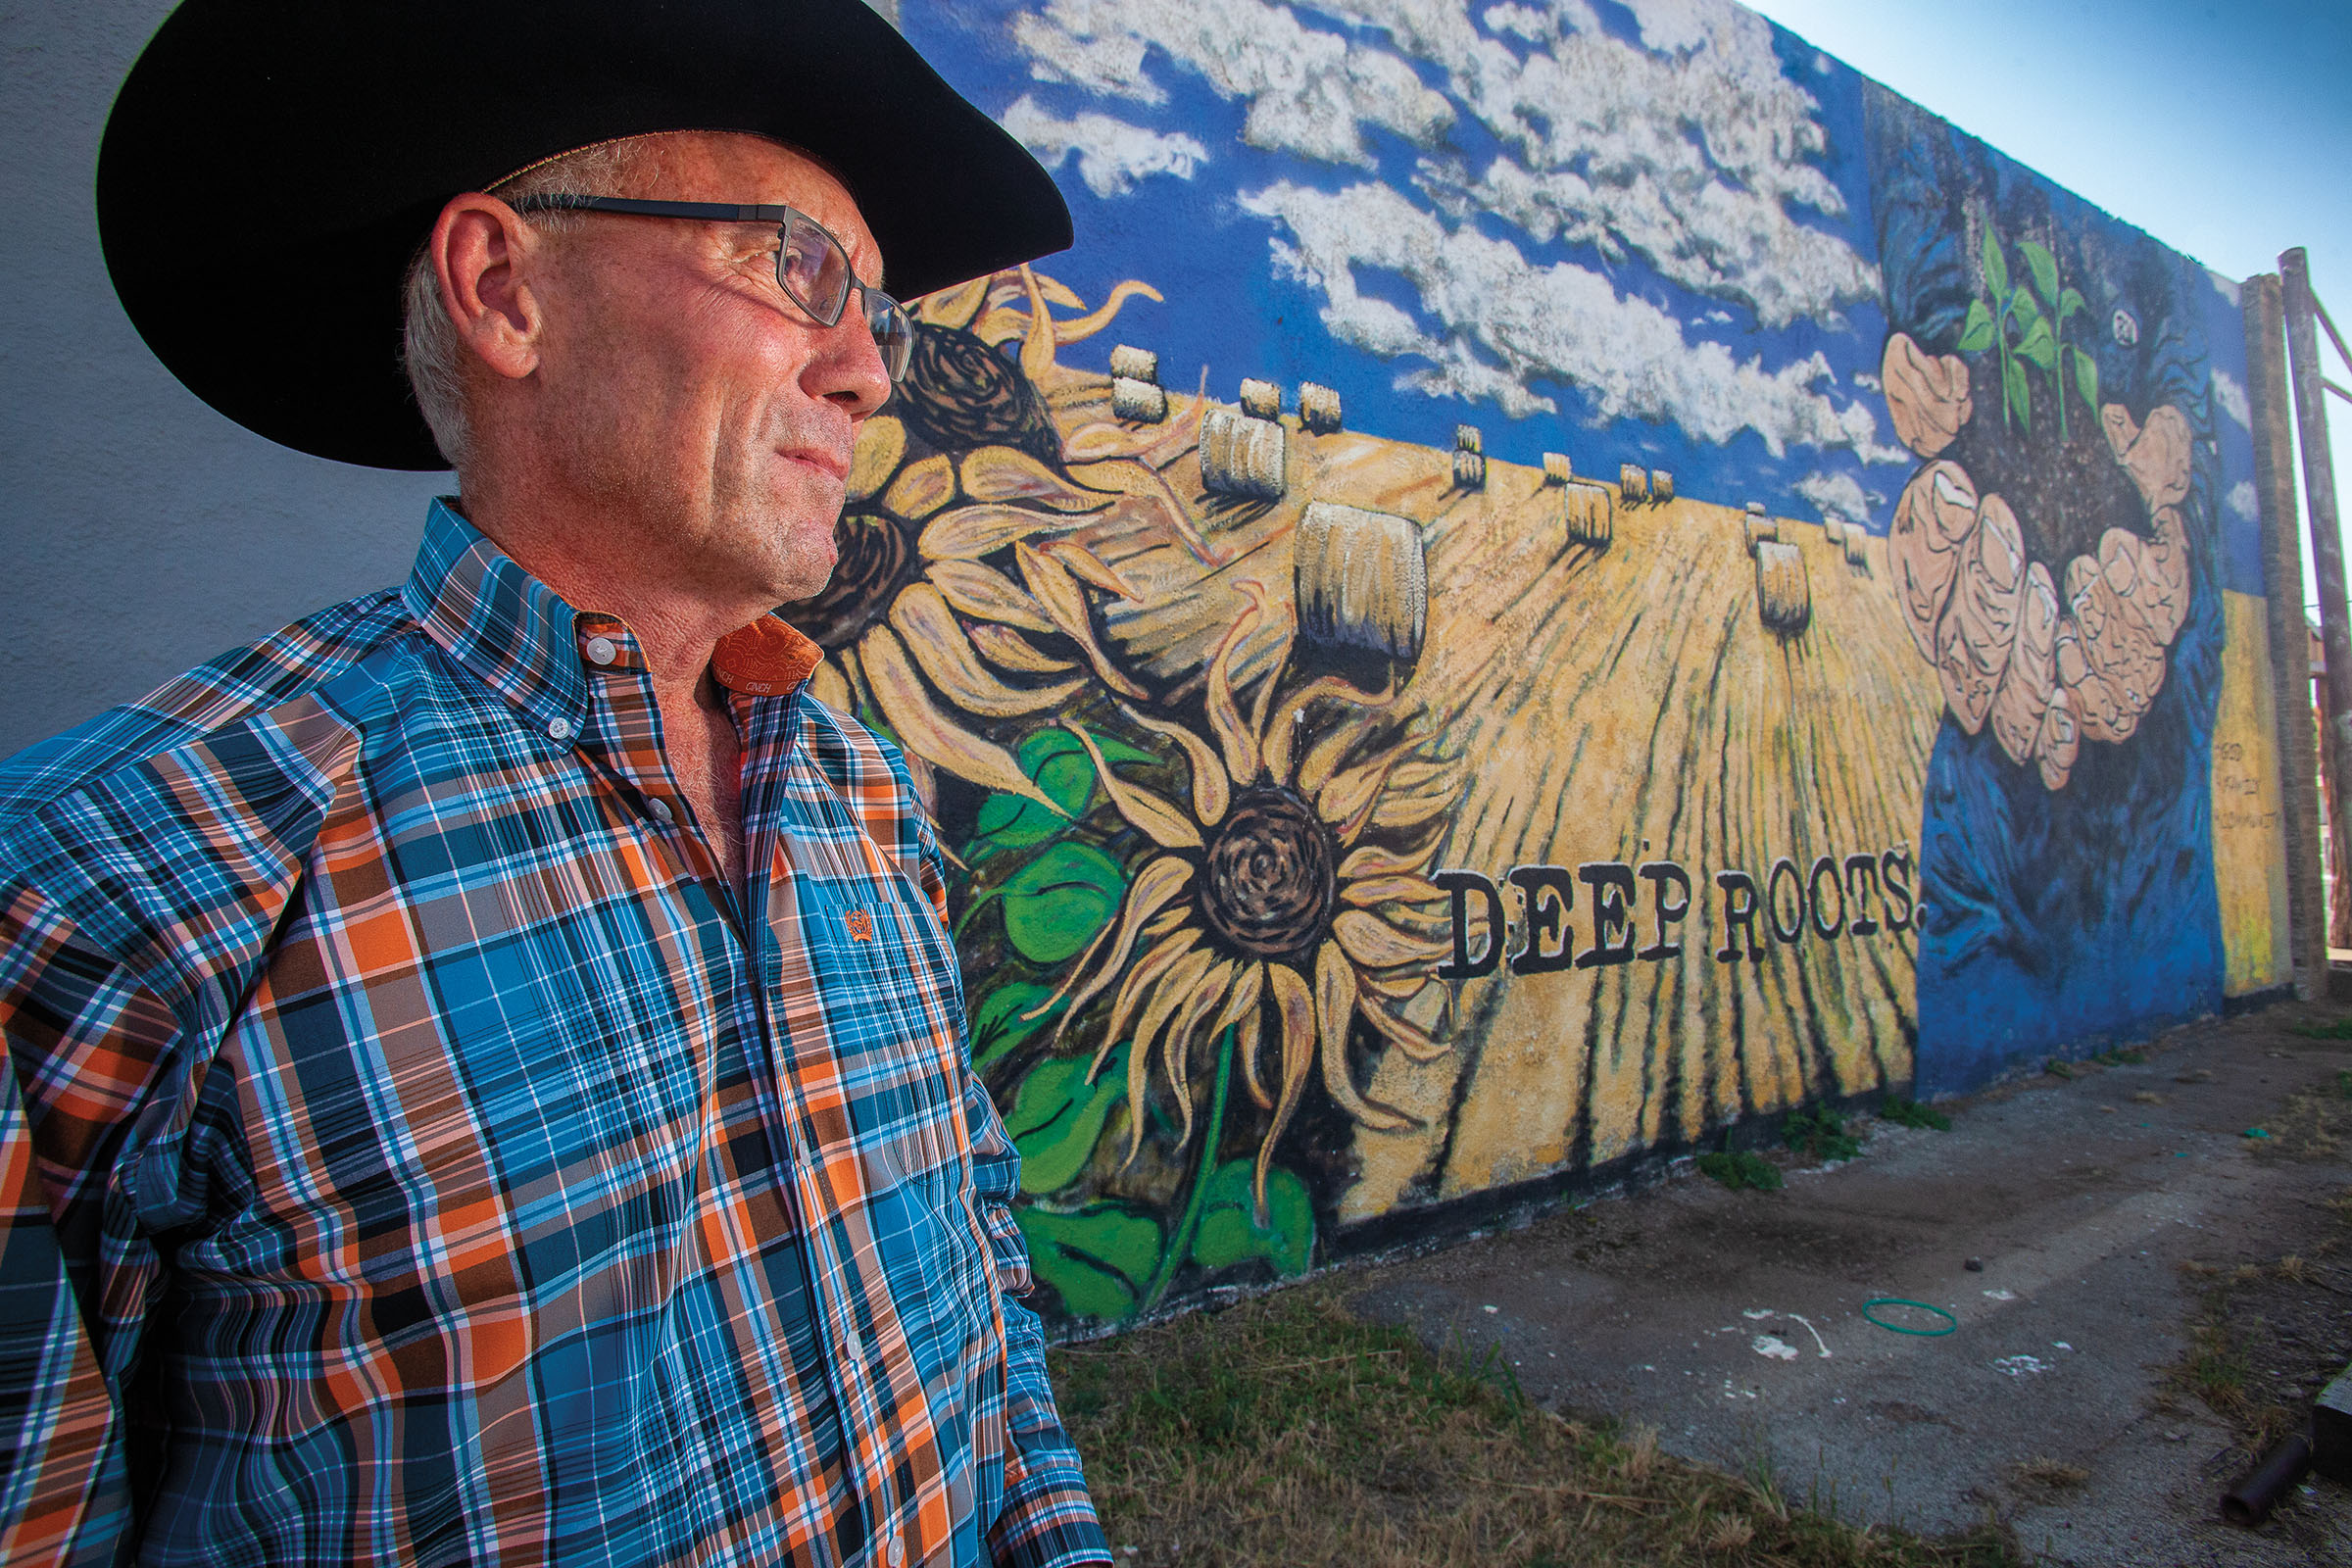 A picture of a man in a black cowboy hat standing in front of a mural of painted sunflowers